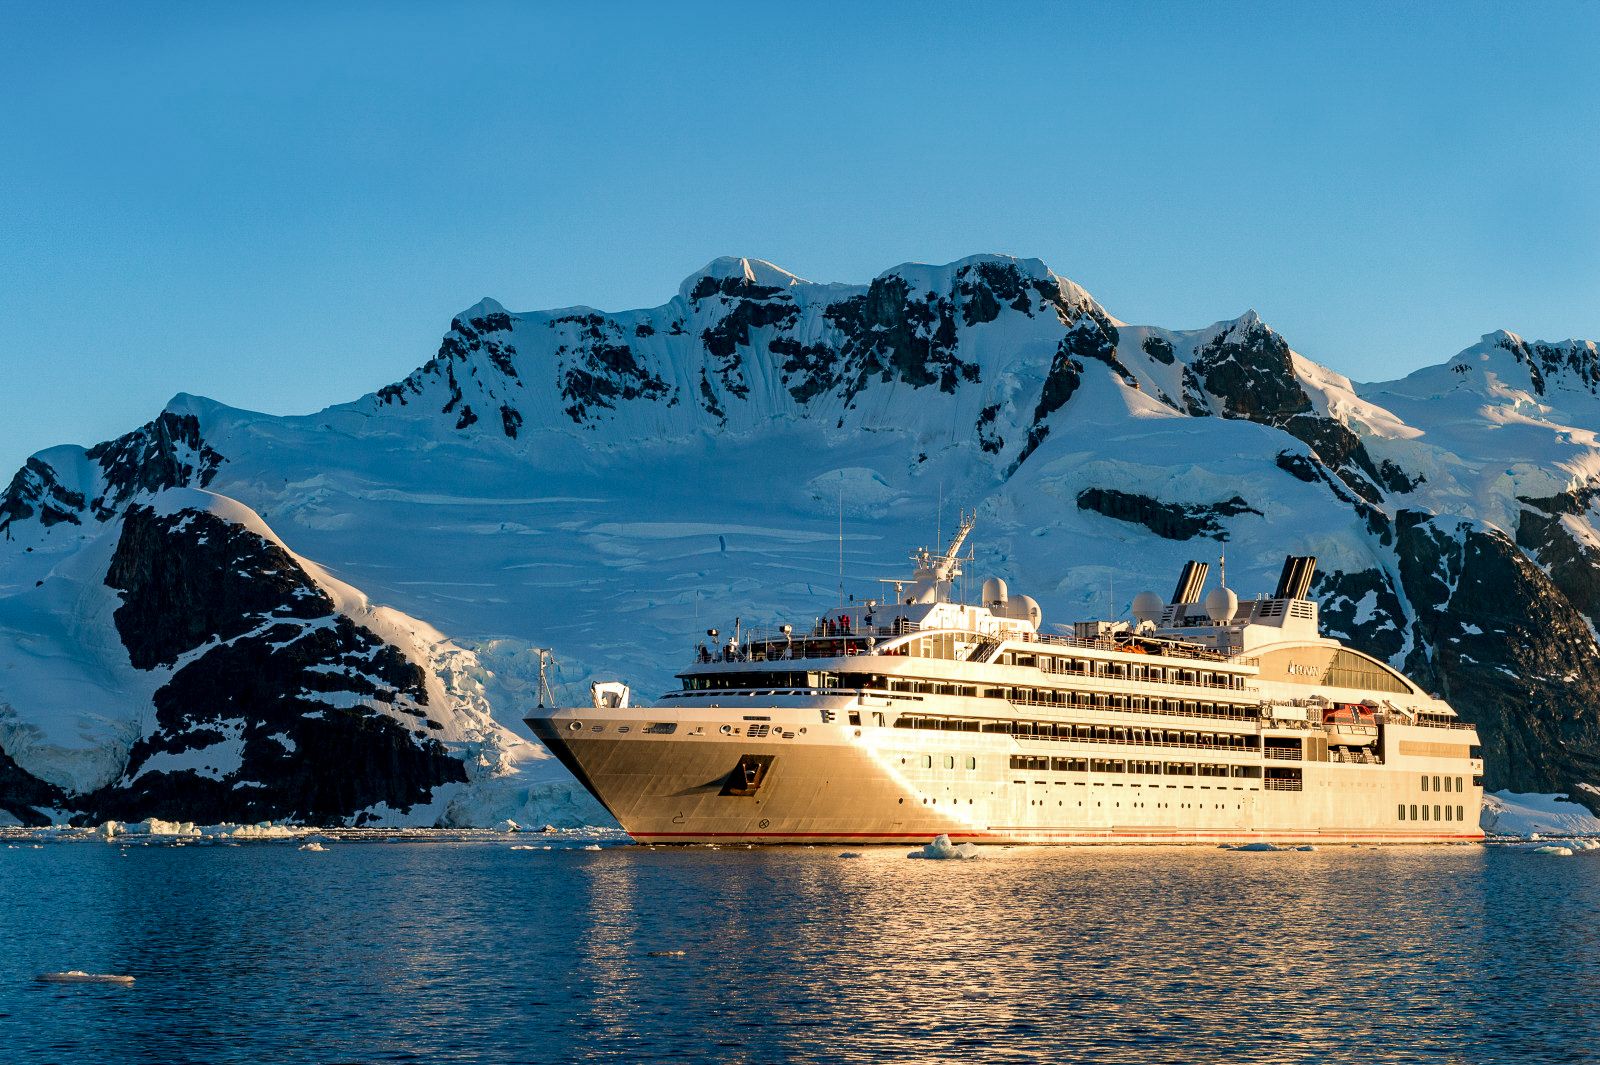 Exterior view of Ponant's Le Lyrial cruise ship in the Arctic